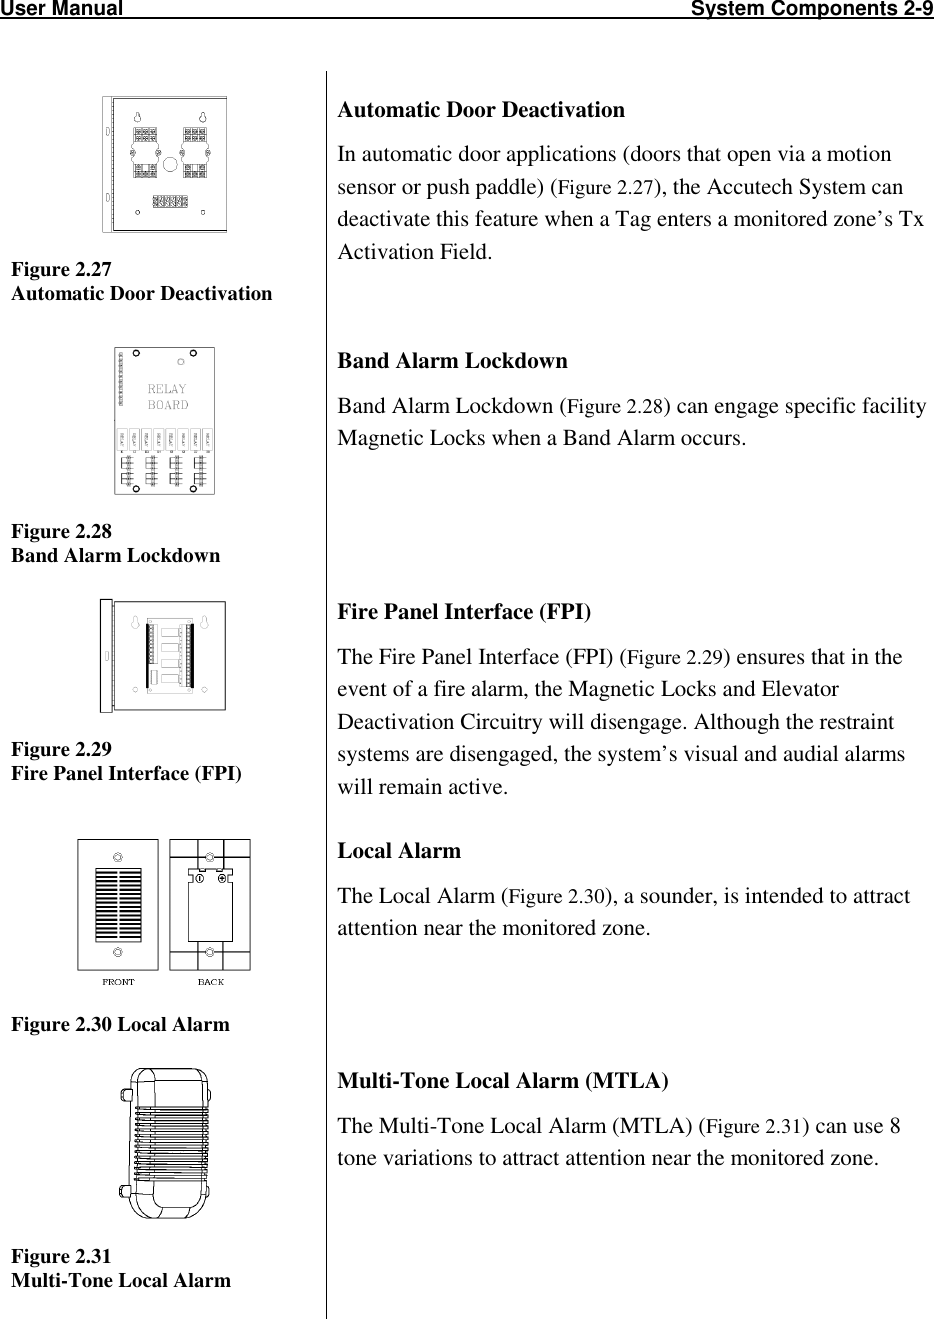 User Manual                                                                                                  System Components 2-9                             Figure 2.27  Automatic Door Deactivation Automatic Door Deactivation In automatic door applications (doors that open via a motion sensor or push paddle) (Figure 2.27), the Accutech System can deactivate this feature when a Tag enters a monitored zone’s Tx Activation Field.   Figure 2.28 Band Alarm Lockdown Band Alarm Lockdown Band Alarm Lockdown (Figure 2.28) can engage specific facility Magnetic Locks when a Band Alarm occurs.    Figure 2.29 Fire Panel Interface (FPI) Fire Panel Interface (FPI) The Fire Panel Interface (FPI) (Figure 2.29) ensures that in the event of a fire alarm, the Magnetic Locks and Elevator Deactivation Circuitry will disengage. Although the restraint systems are disengaged, the system’s visual and audial alarms will remain active.  Figure 2.30 Local Alarm Local Alarm The Local Alarm (Figure 2.30), a sounder, is intended to attract attention near the monitored zone.   Figure 2.31 Multi-Tone Local Alarm Multi-Tone Local Alarm (MTLA) The Multi-Tone Local Alarm (MTLA) (Figure 2.31) can use 8 tone variations to attract attention near the monitored zone.     